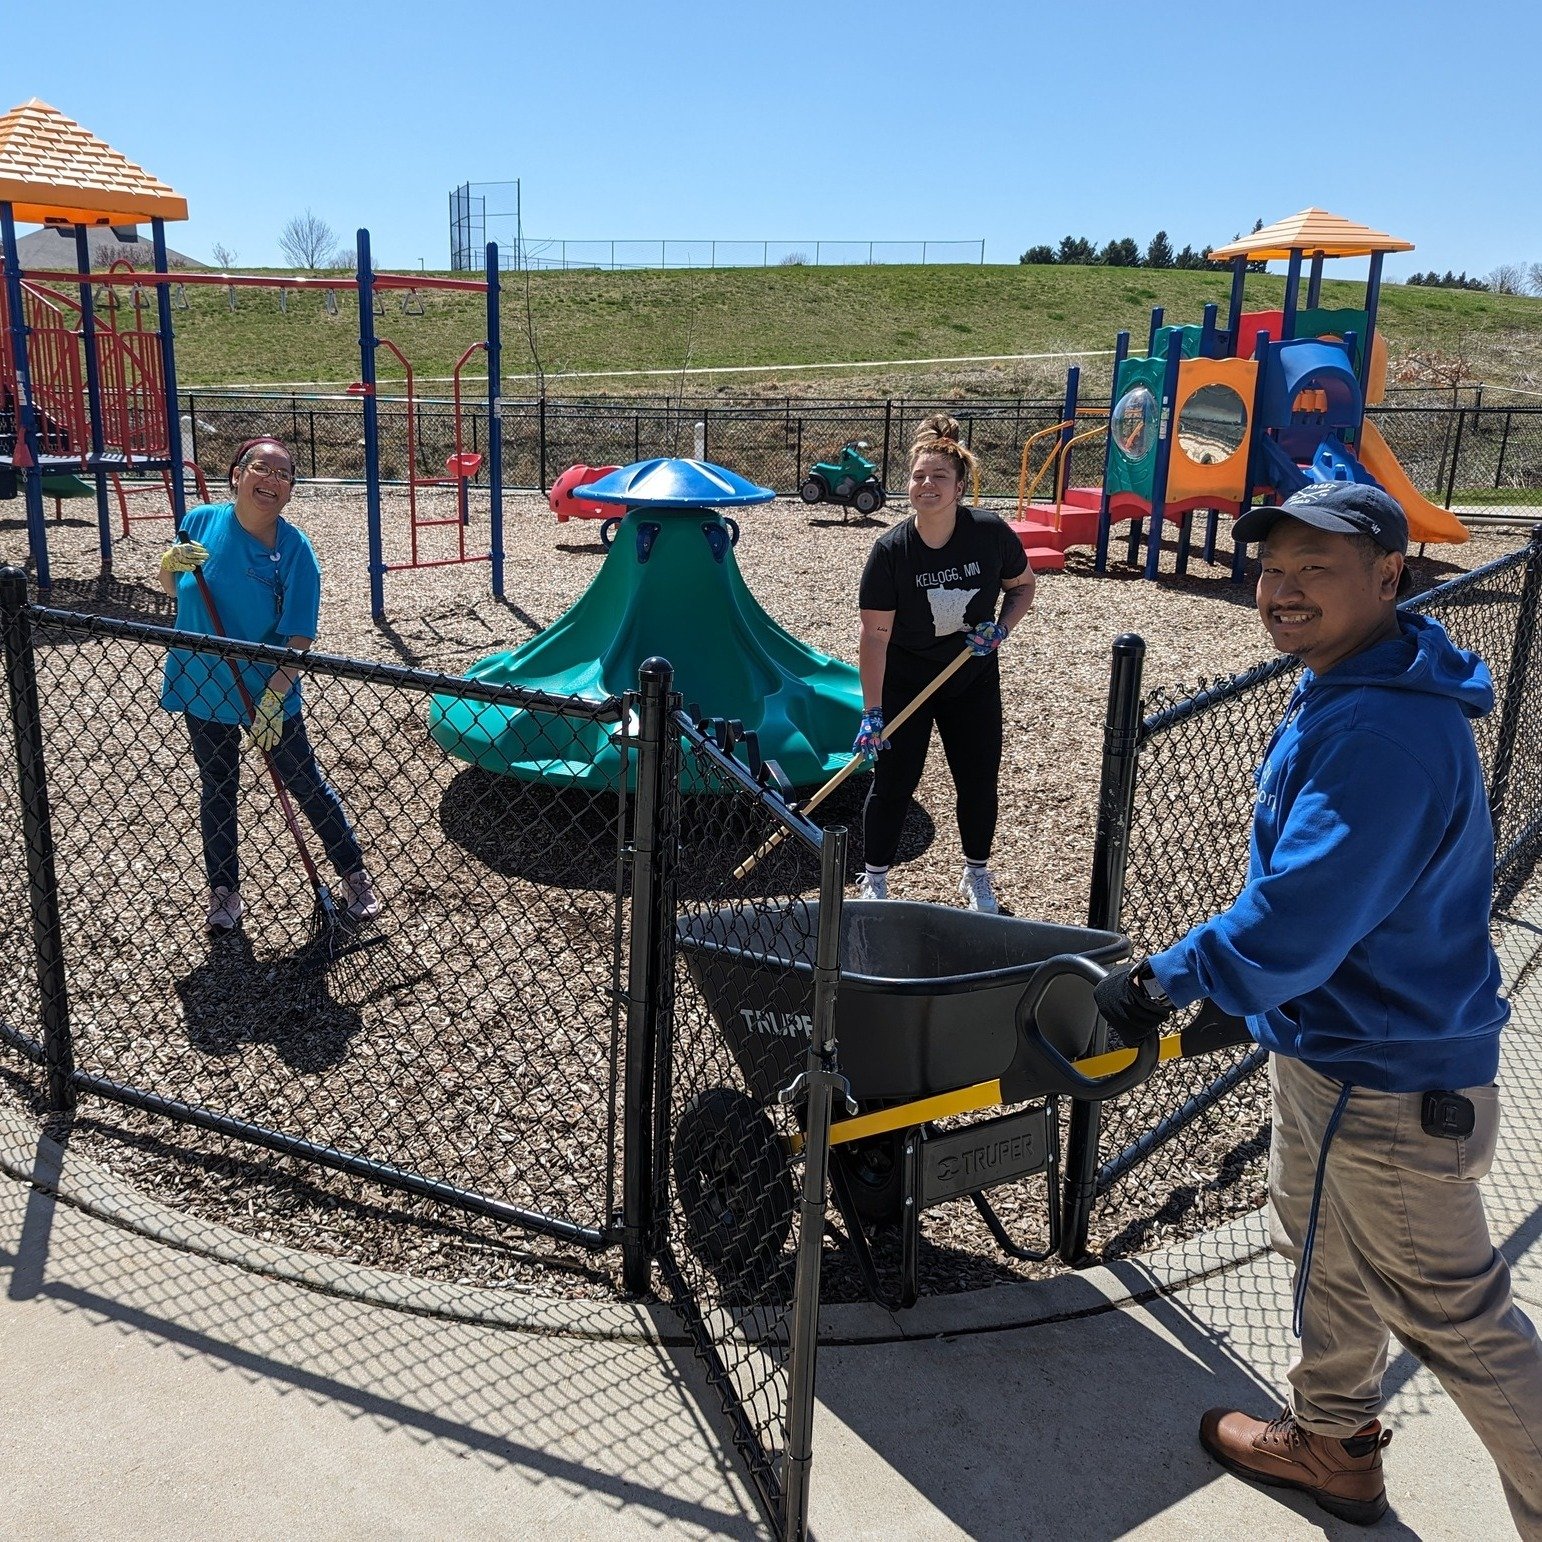 Great work by our team at Gage East in Rochester. Preparing for a super fun summer outside! 
#rochestermn #AffordableHousing #getoutsideandplay